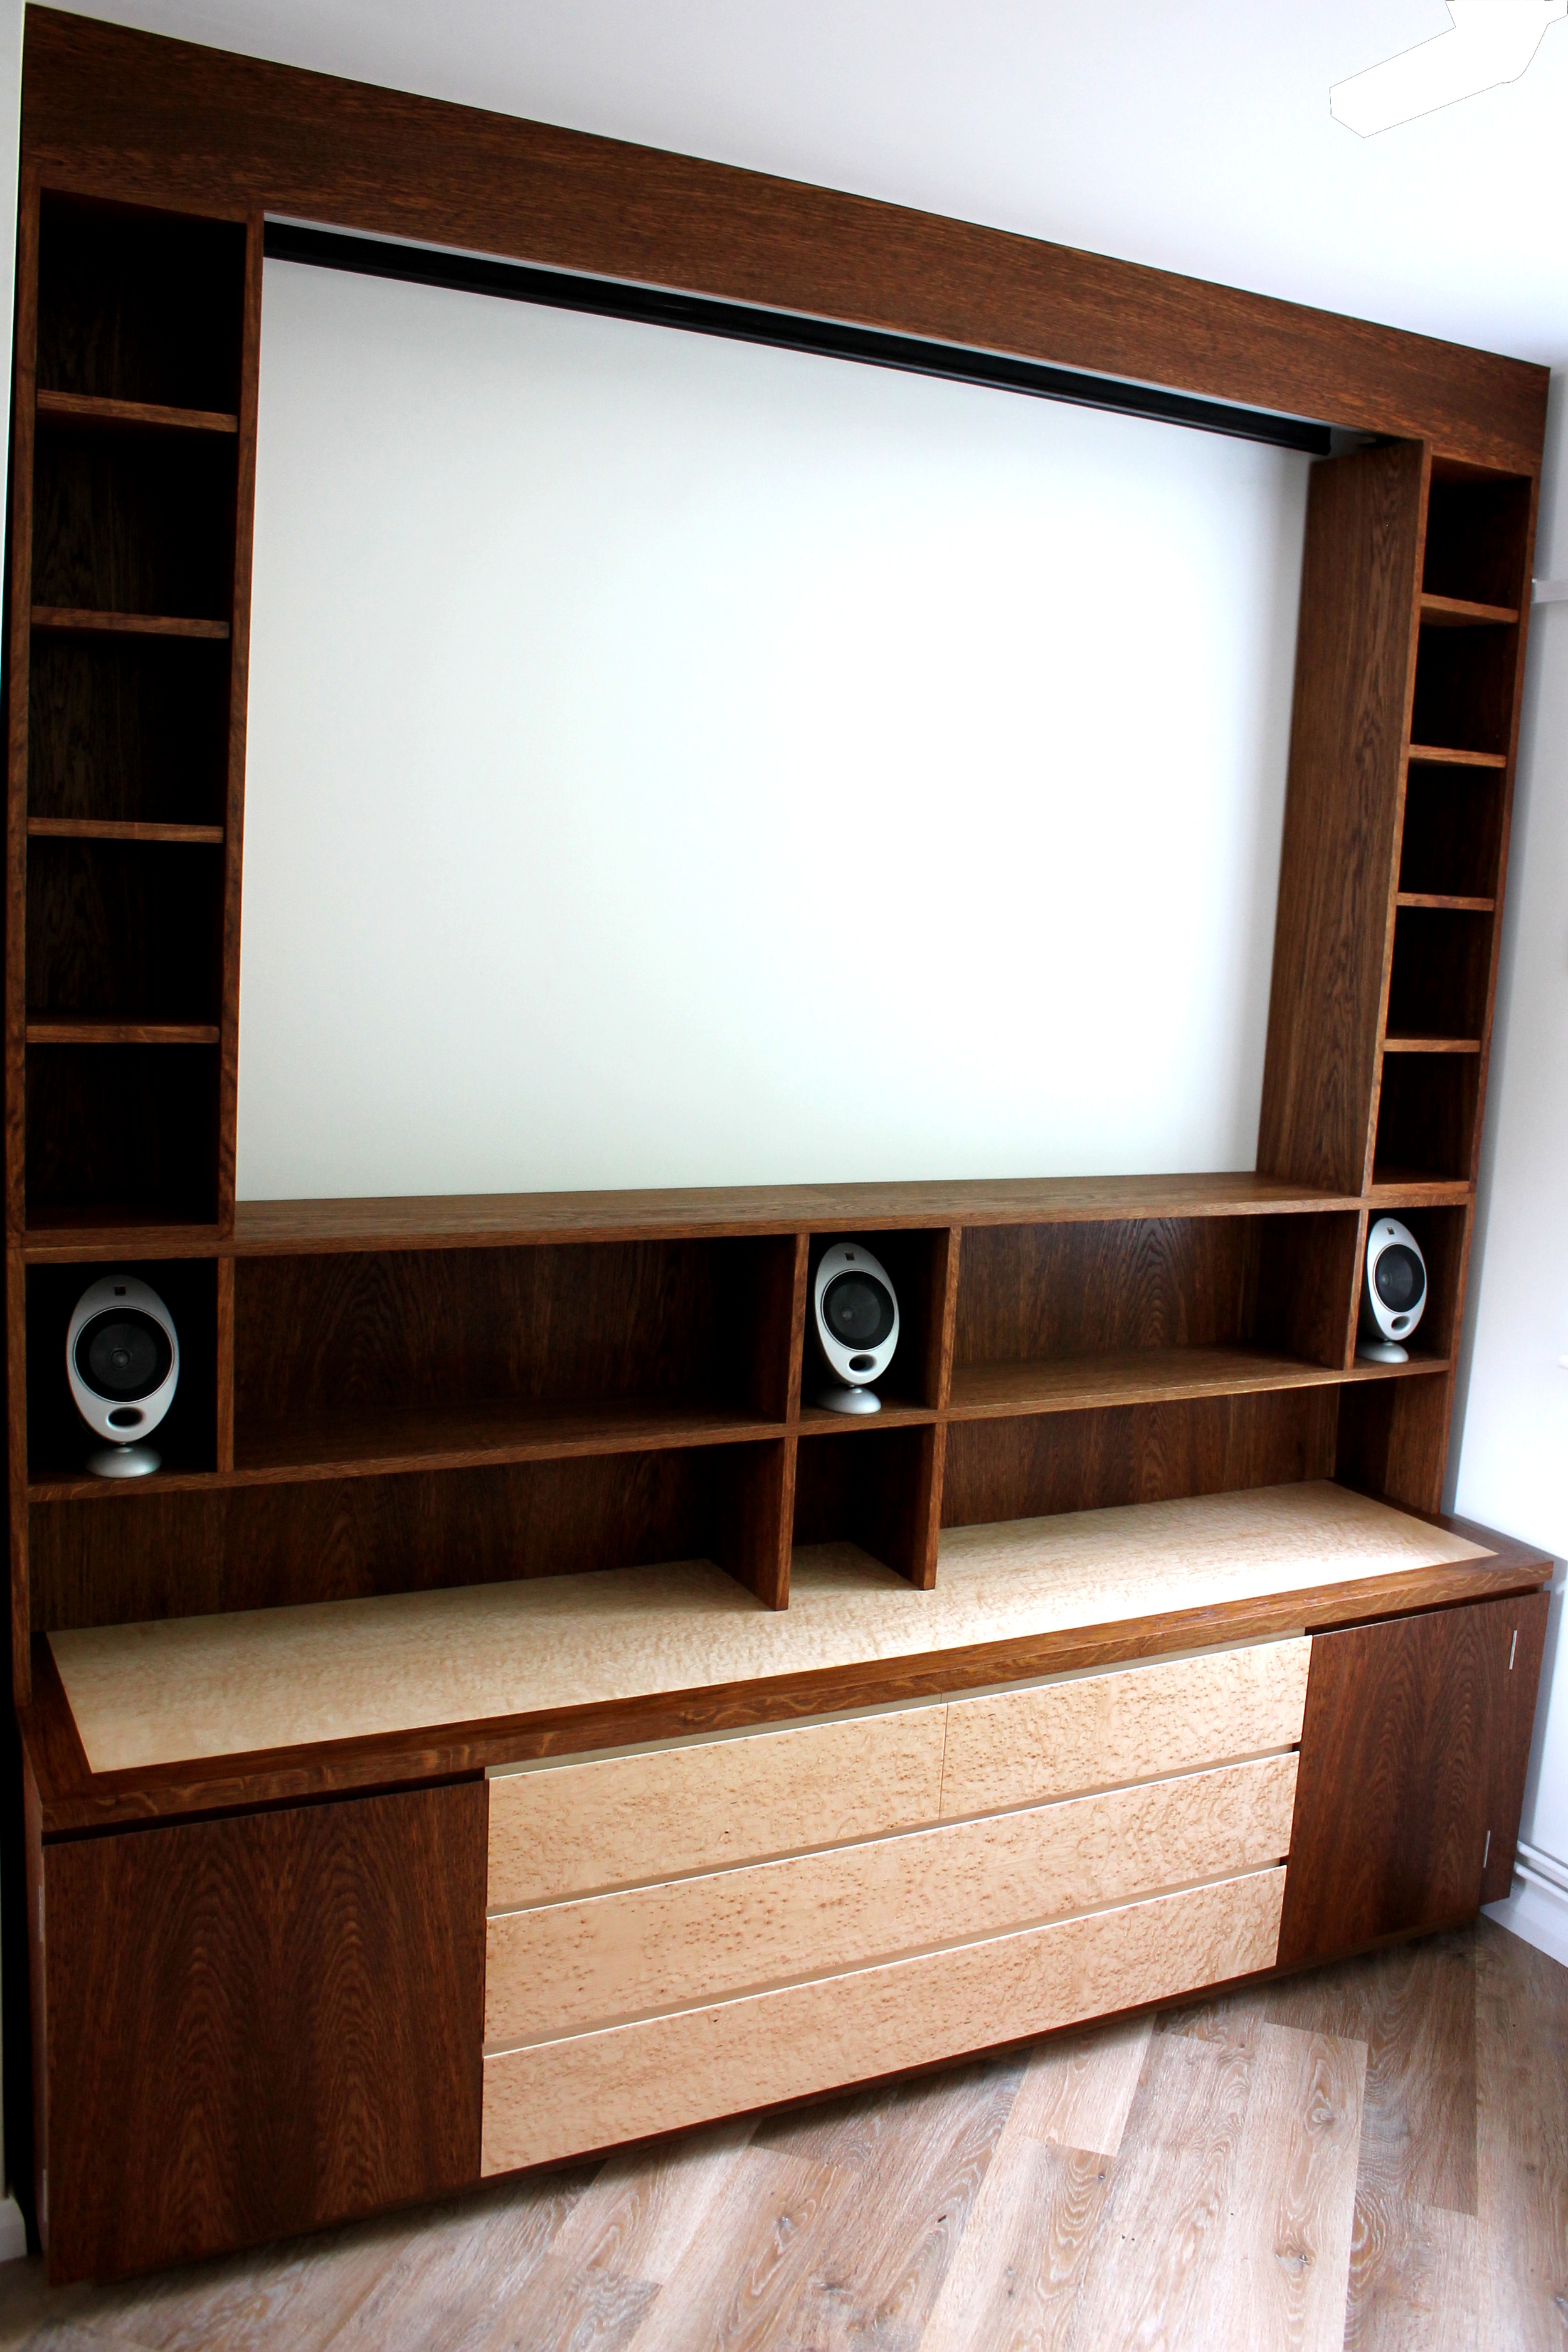 The Vatch Projector/Media Cabinet